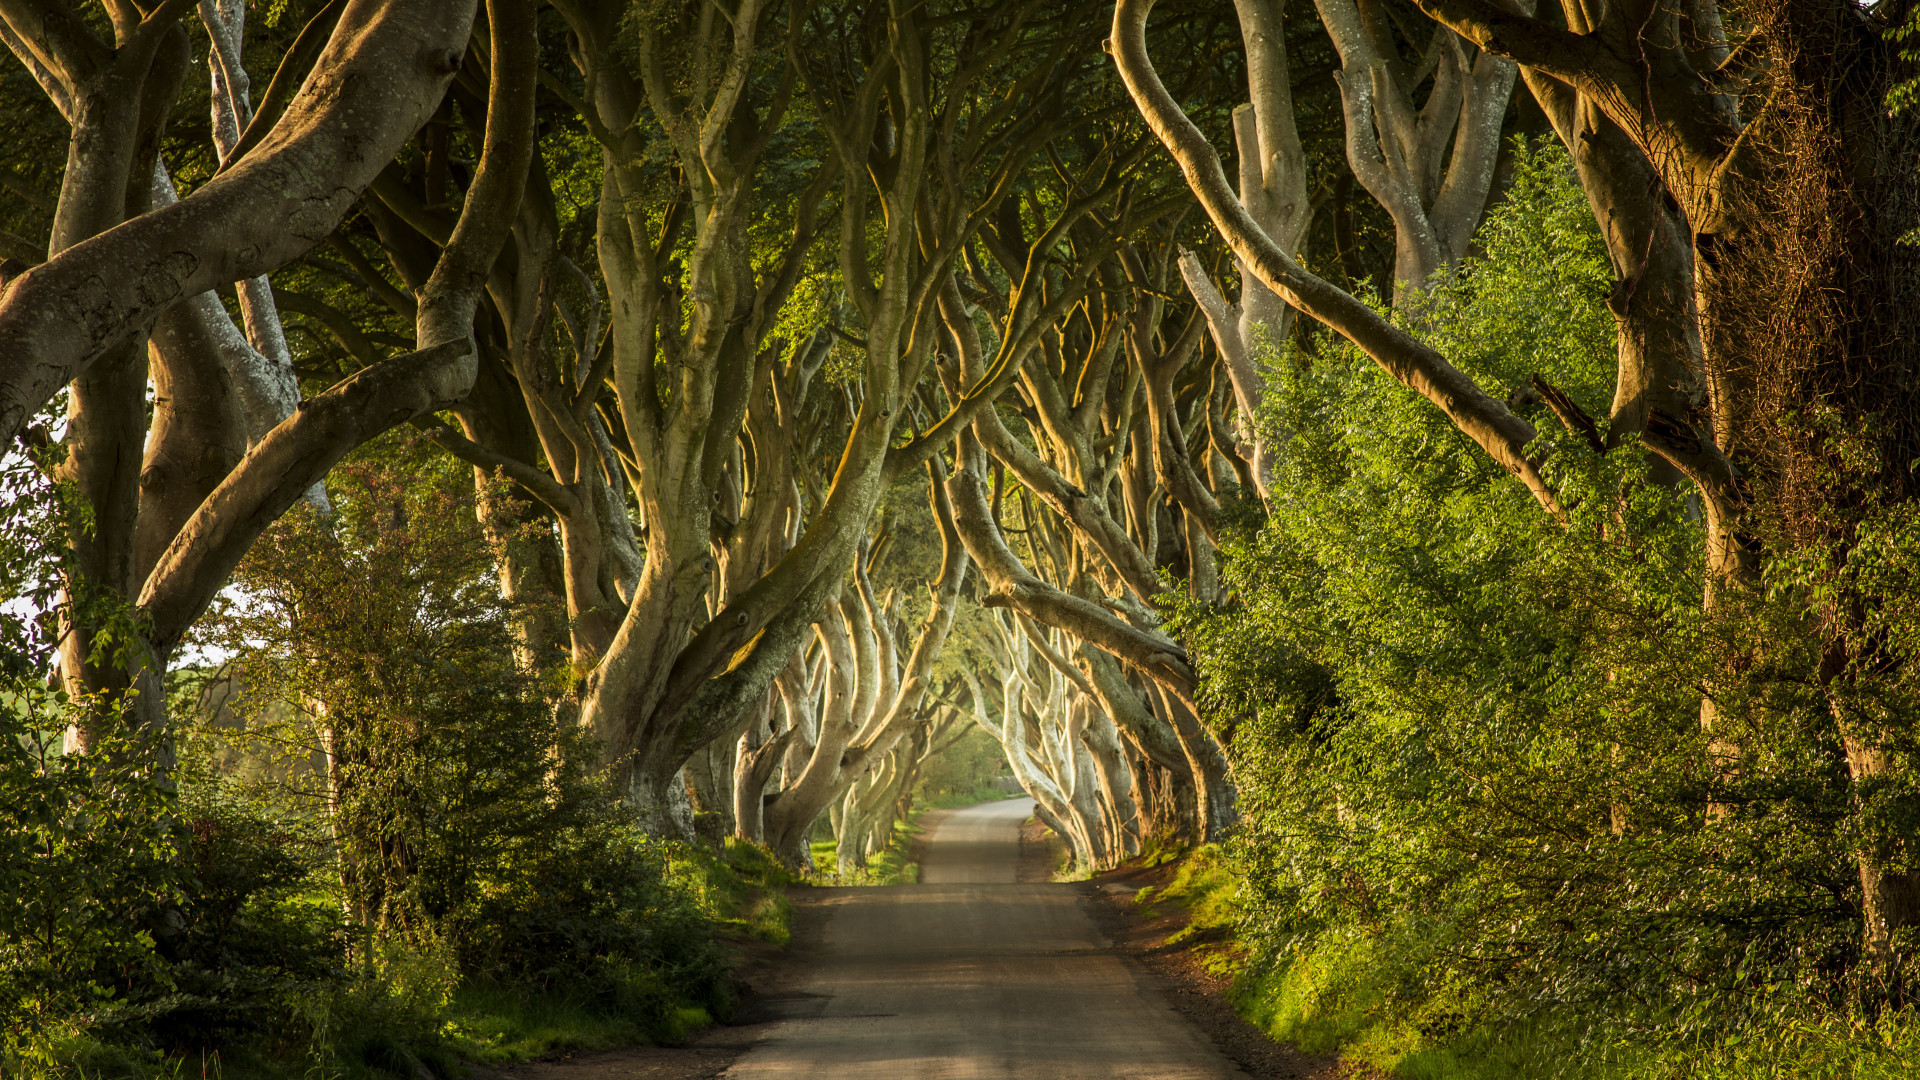 The tunnel of trees has appeared in HBO’s hit series ‘Game of Thrones’.<p><a href="https://www.msn.com/en-us/community/channel/vid-7xx8mnucu55yw63we9va2gwr7uihbxwc68fxqp25x6tg4ftibpra?cvid=94631541bc0f4f89bfd59158d696ad7e">Follow us and access great exclusive content every day</a></p>